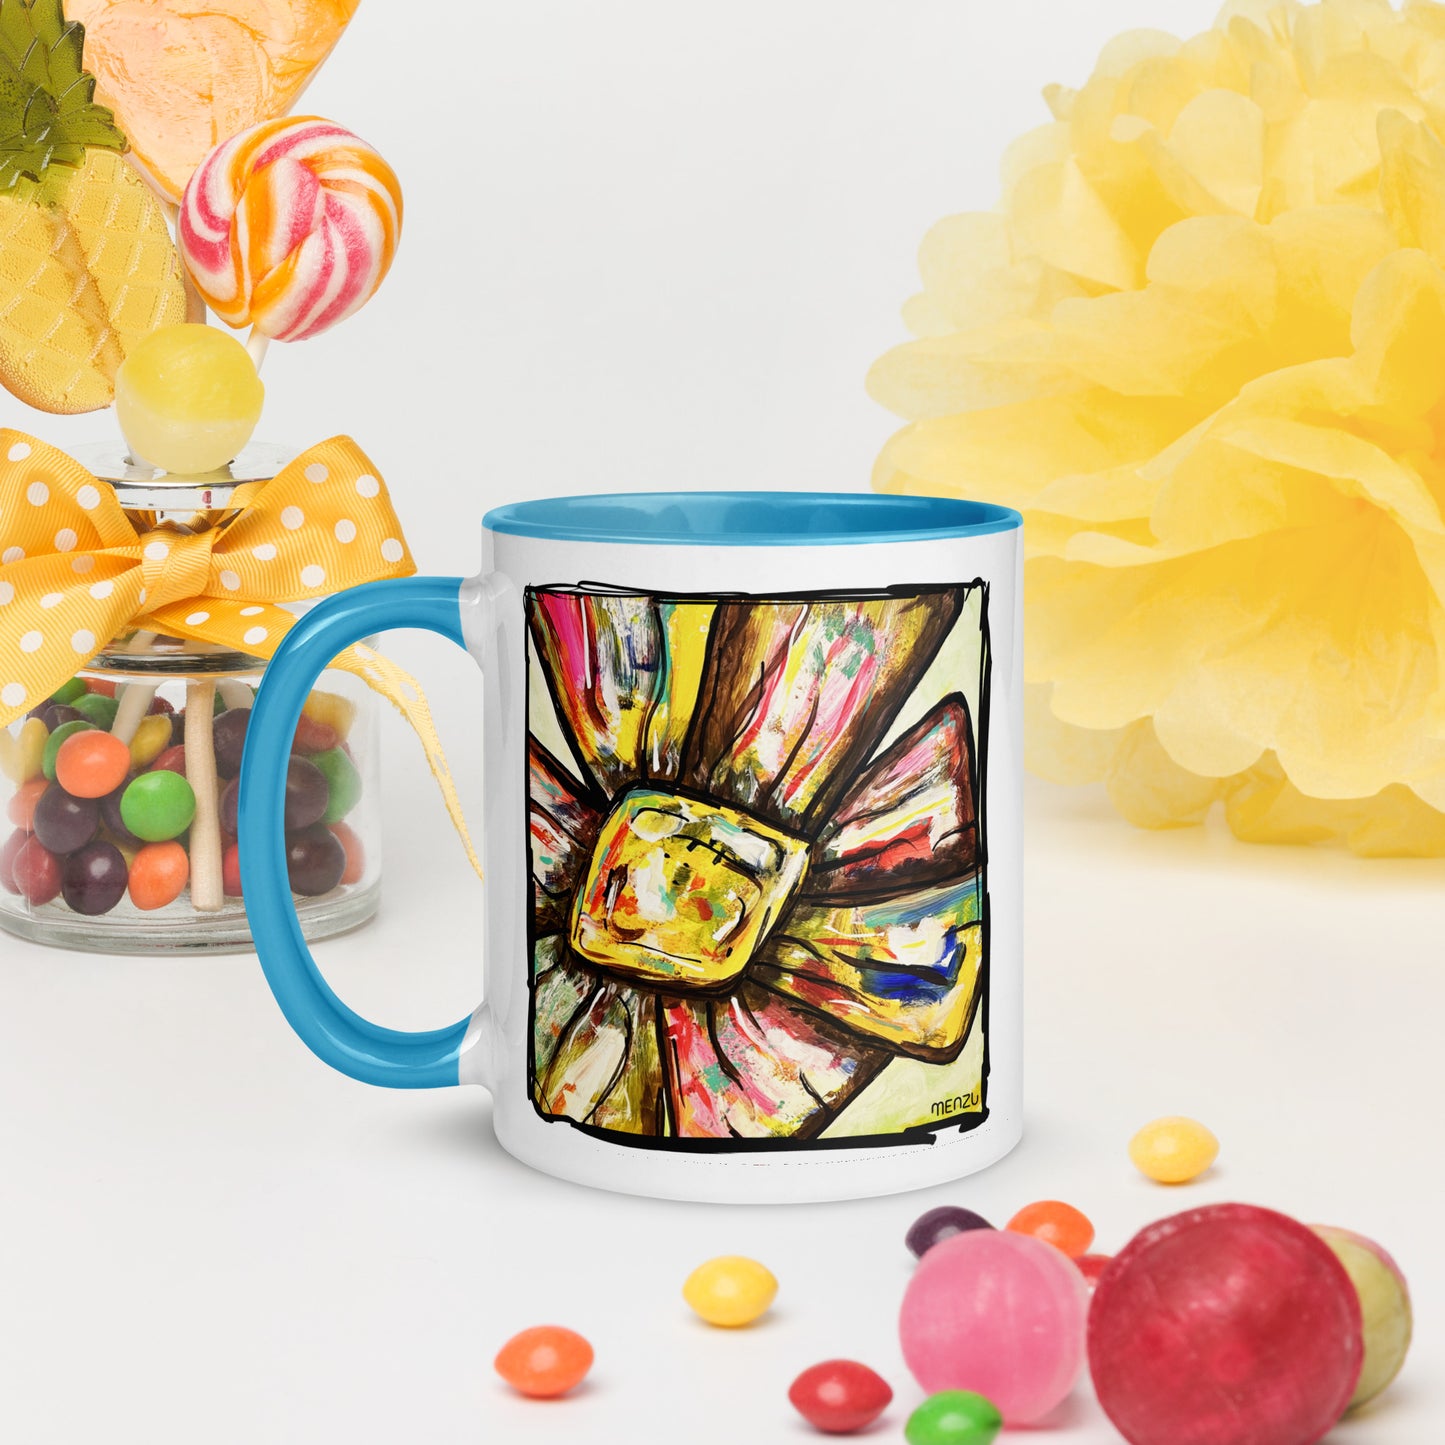 They are watching us - Flower N.4 - Mug